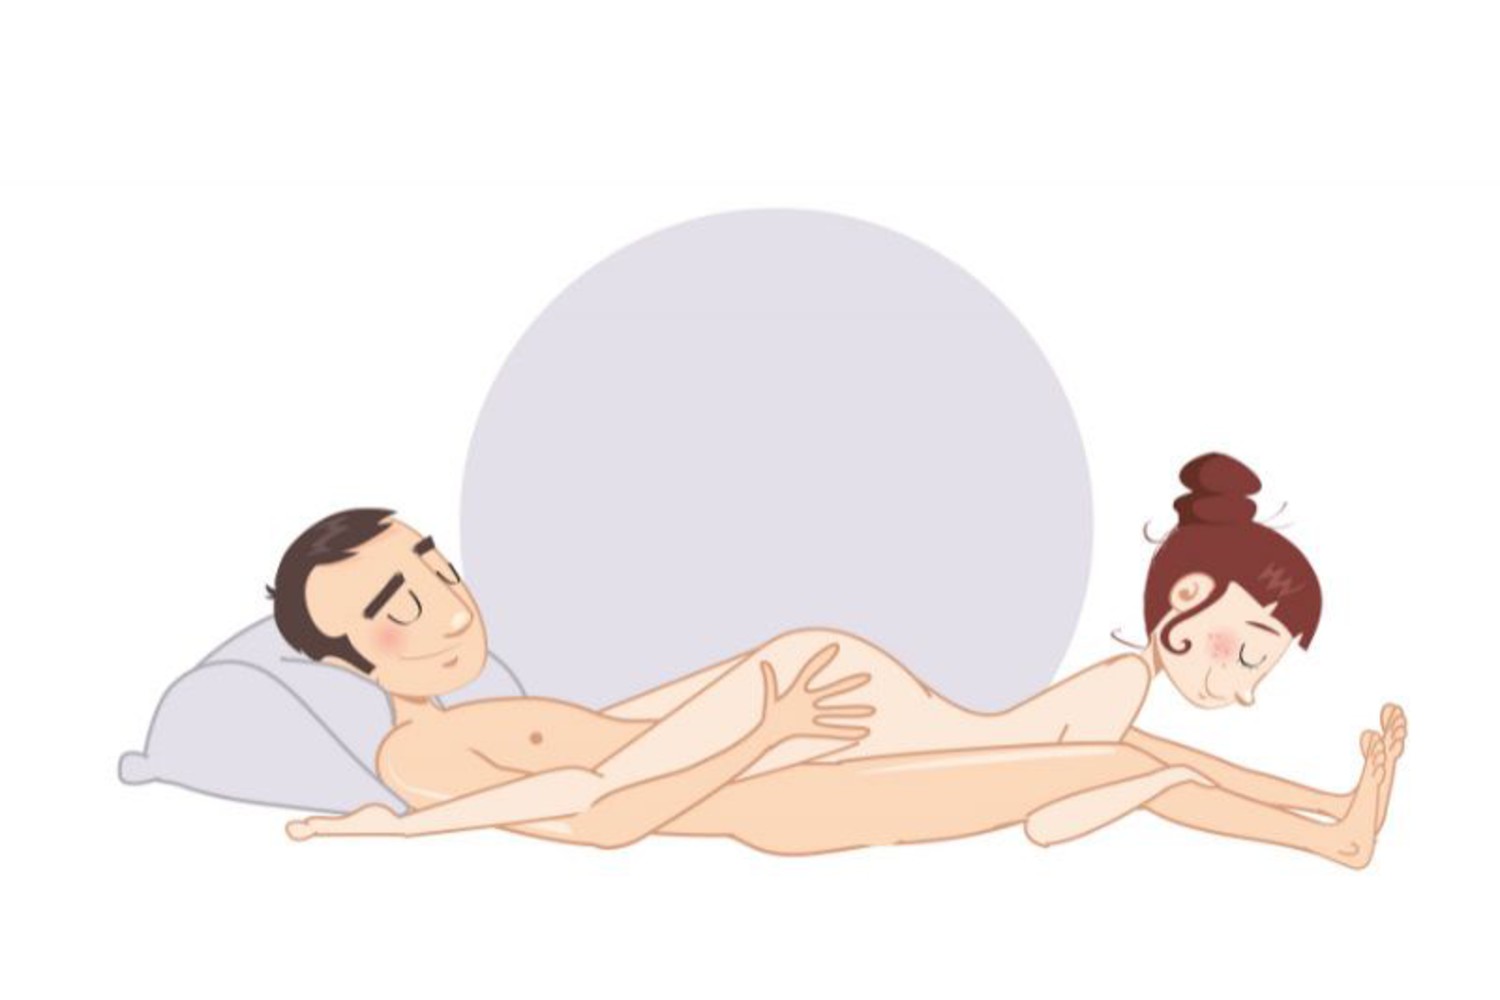 The X-Rated Sex Position